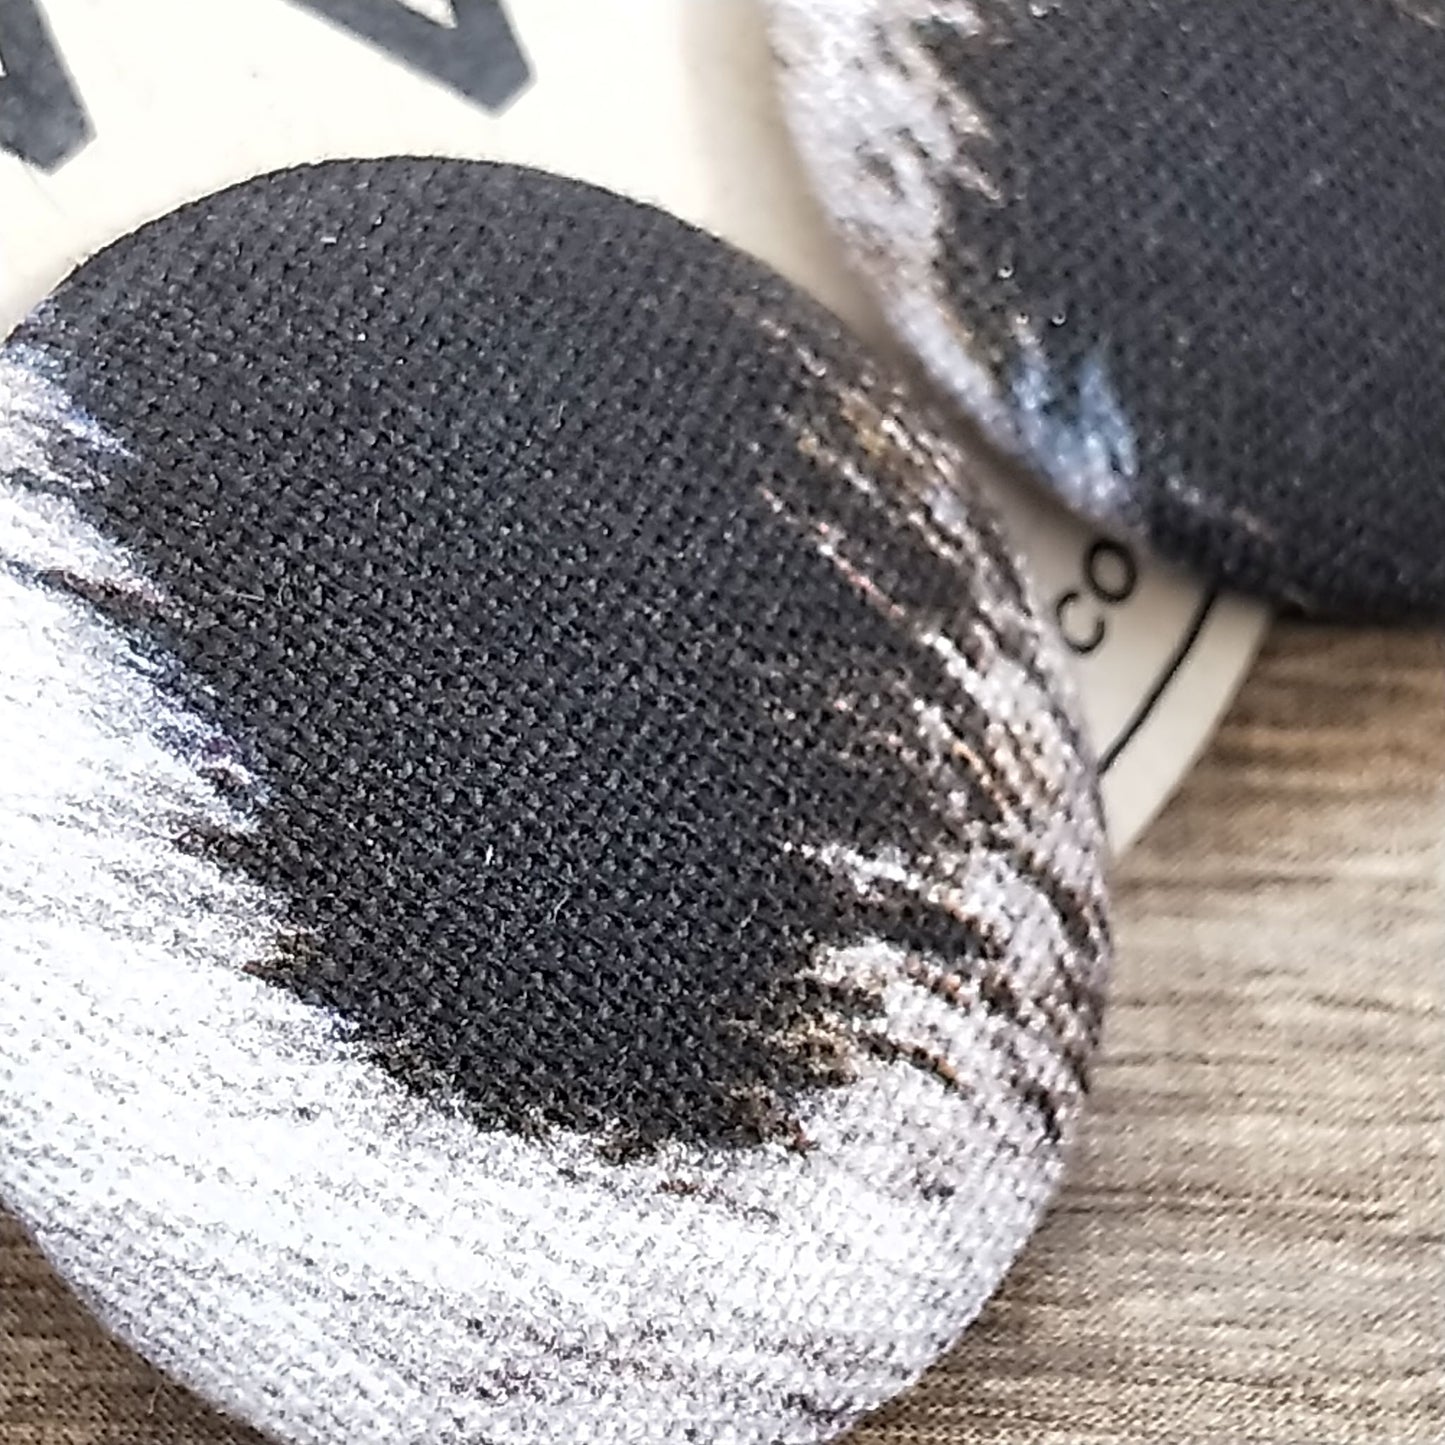 Wildears Fabric Covered Button Earrings Black White Fur 27mm